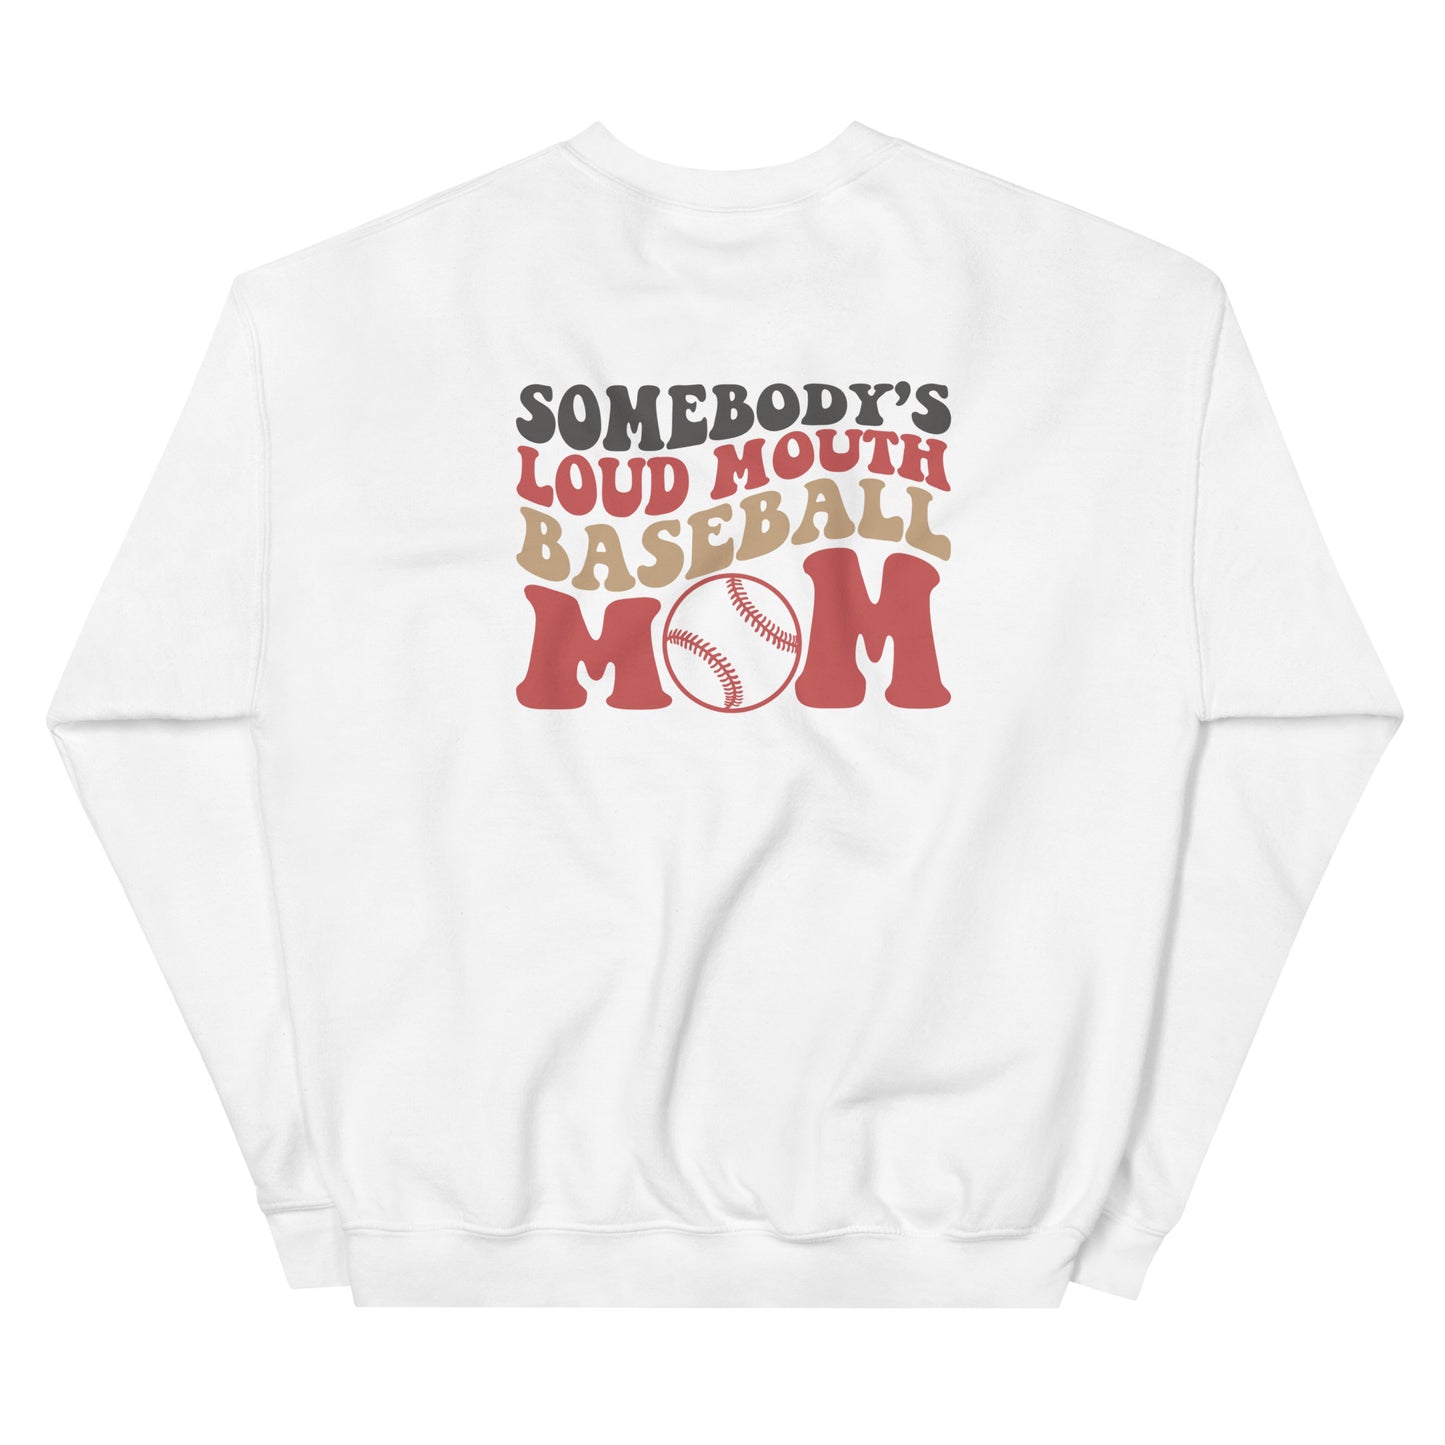 "Somebody's Loud Mouth Baseball Mom" Sweatshirt: Cozy Comfort Meets Game-Day Style!